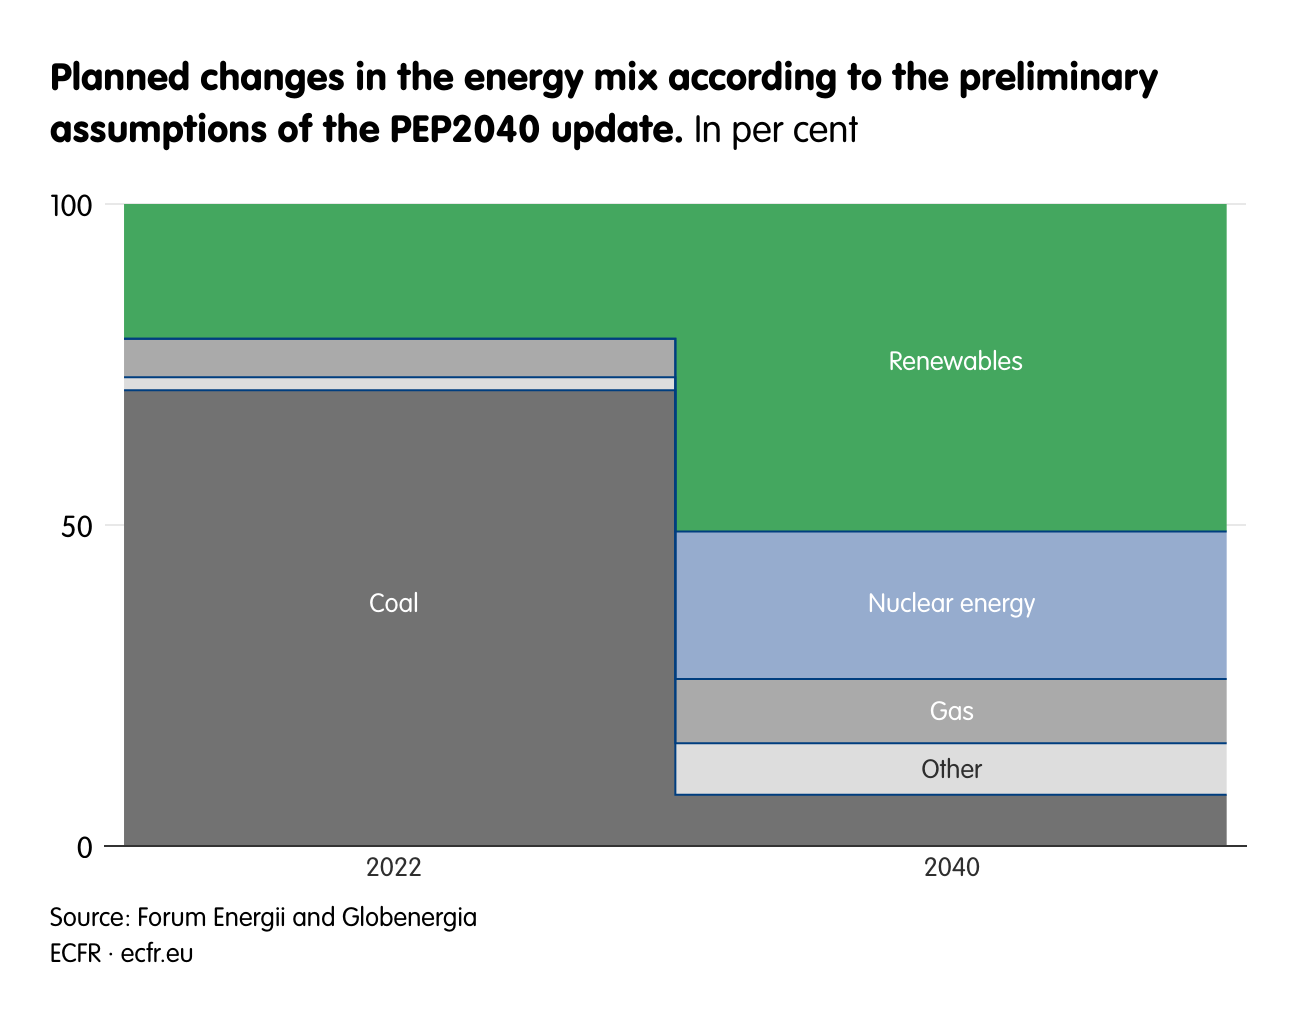 Planned changes in the energy mix according to the preliminary assumptions of the PEP2040 update.